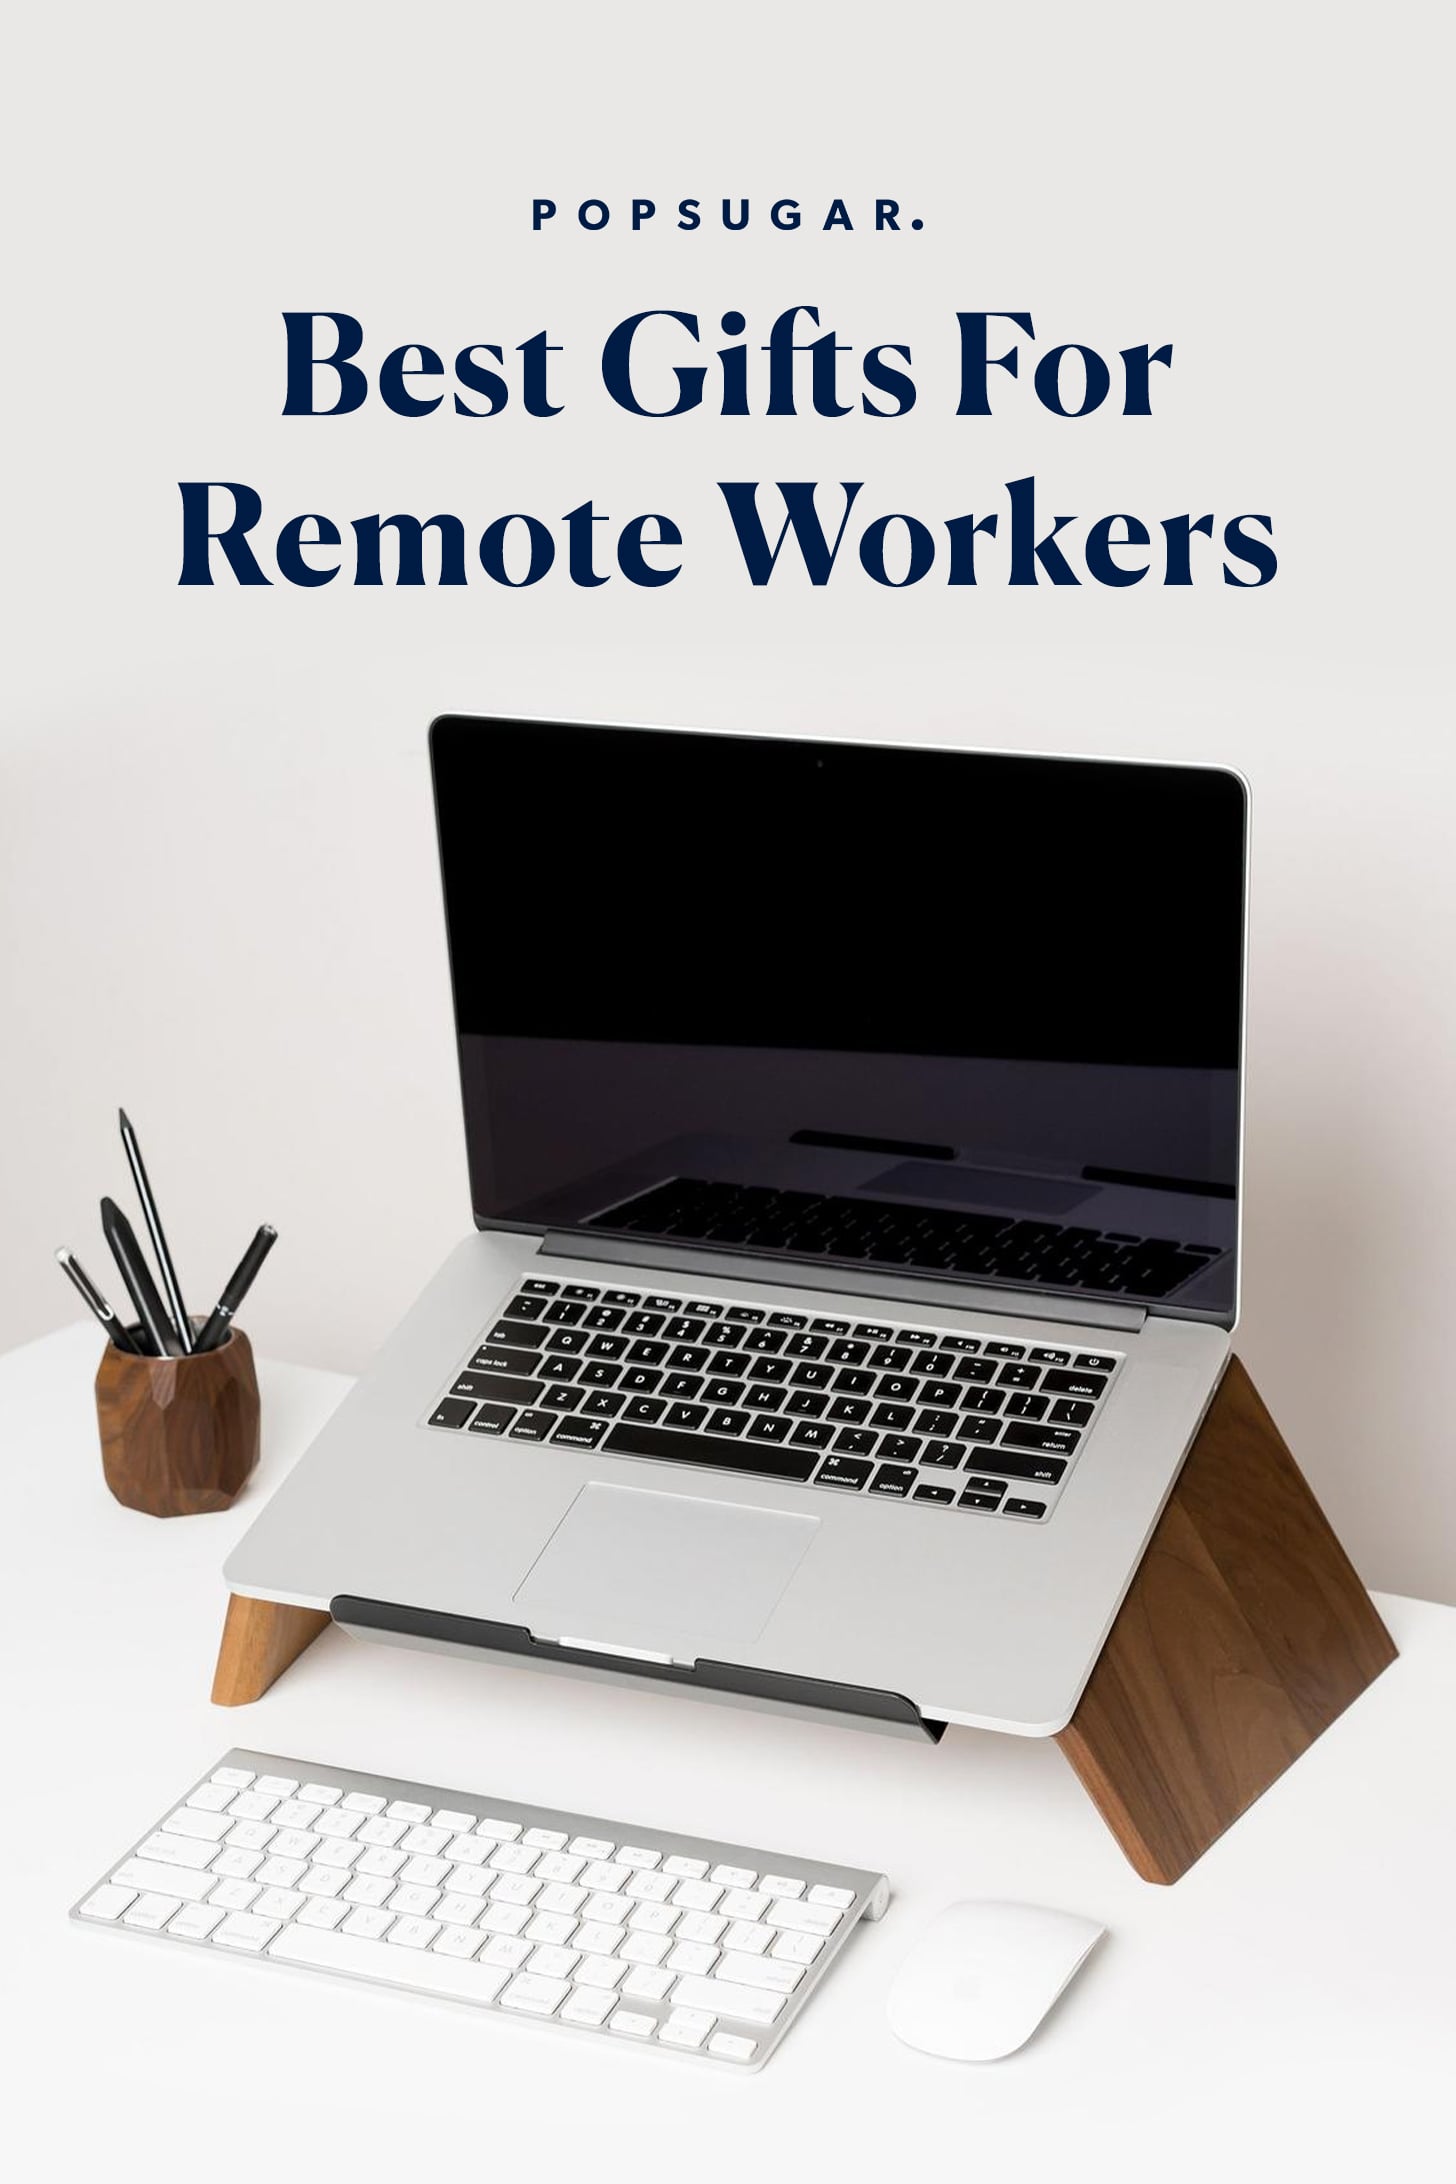 Best Gifts For Remote Workers